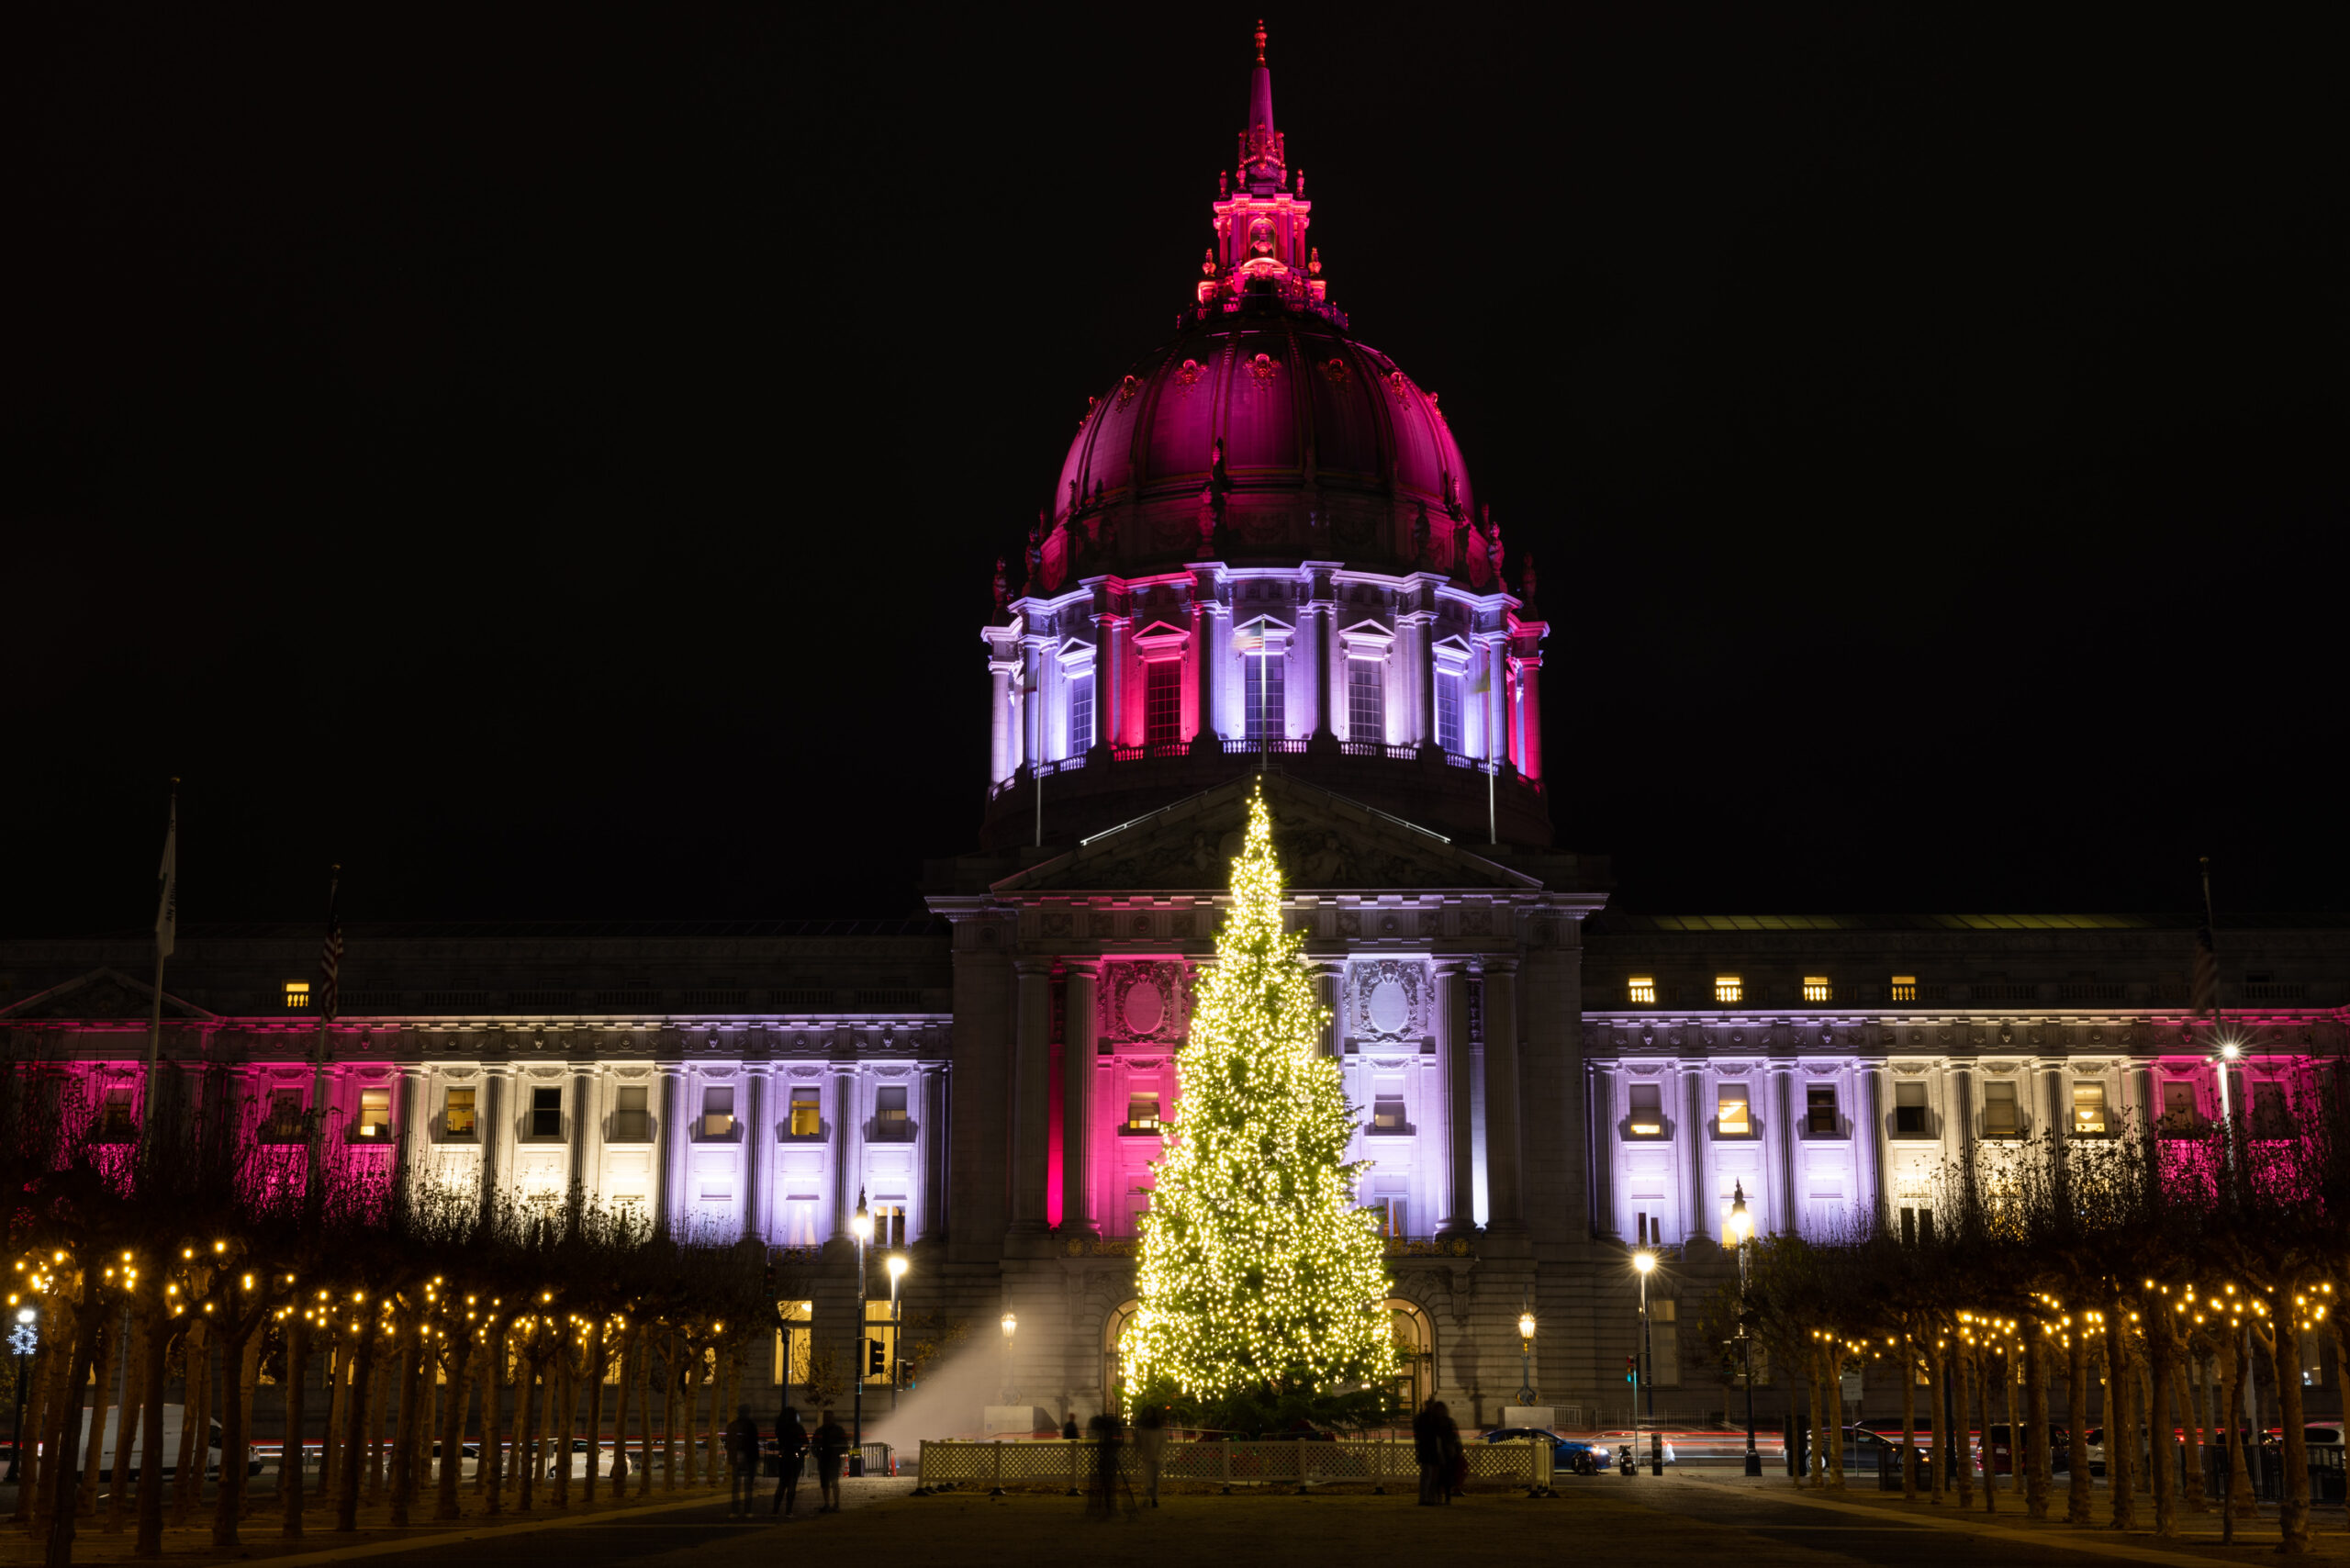 A christmas tree in front of city hall.